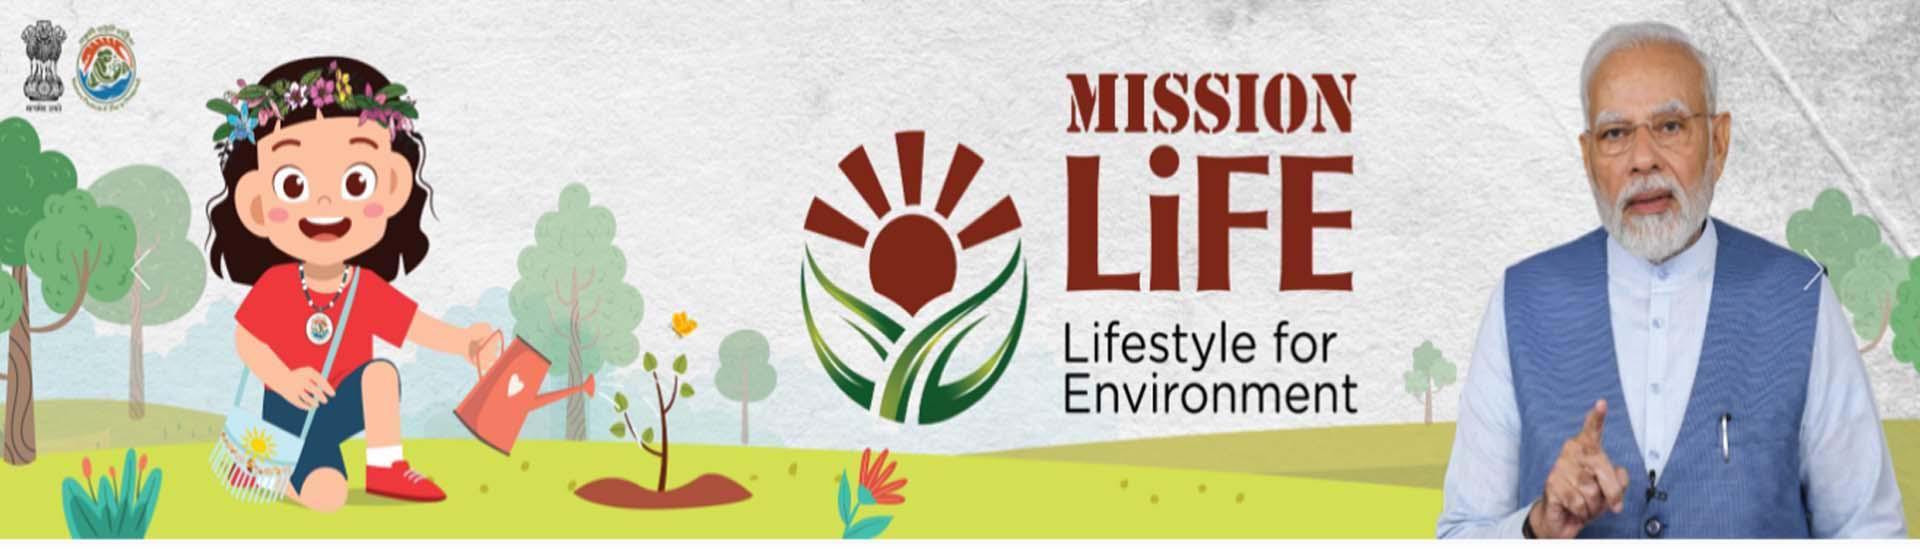 LiFE - Lifestyle for Environment